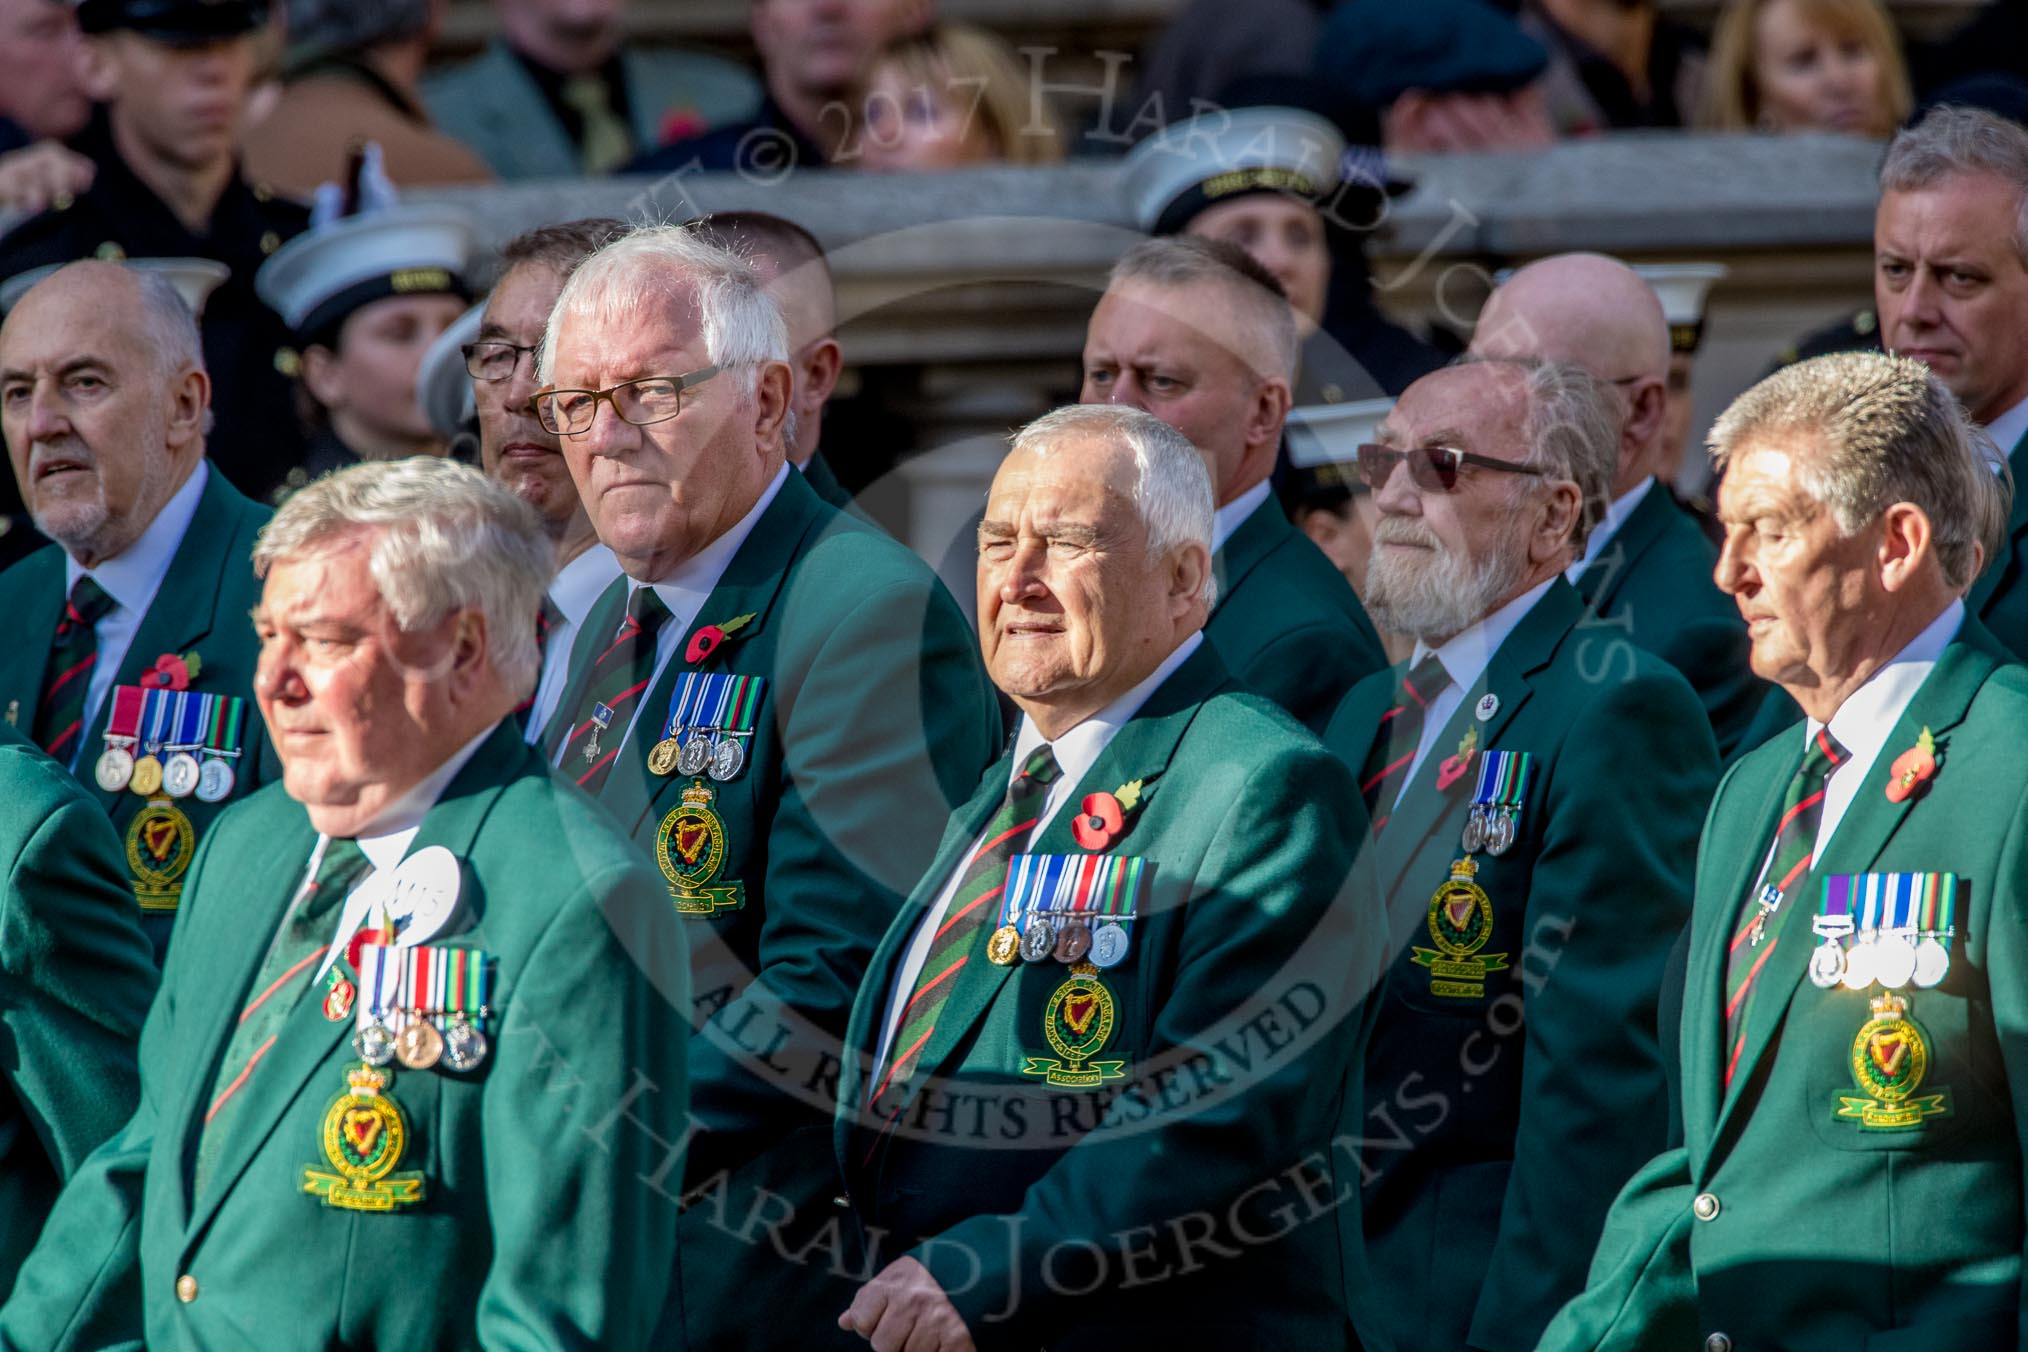 Royal Ulster Constabulary GC Association (Group M15, 40 members) during the Royal British Legion March Past on Remembrance Sunday at the Cenotaph, Whitehall, Westminster, London, 11 November 2018, 12:26.